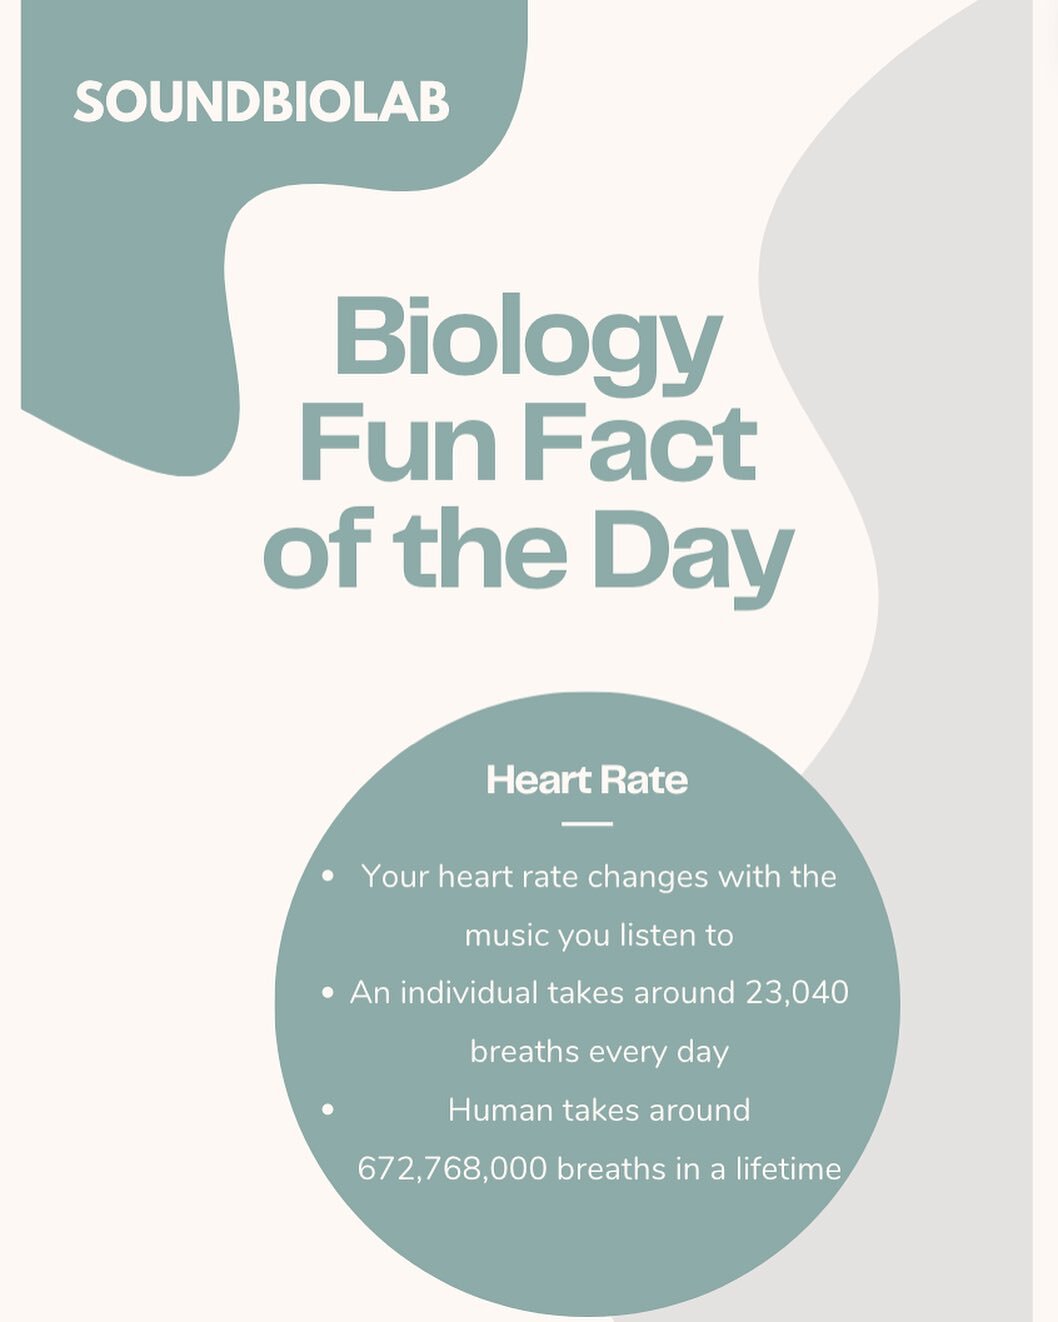 A fun fact about biology, to end your day off right! #biology #funfacts